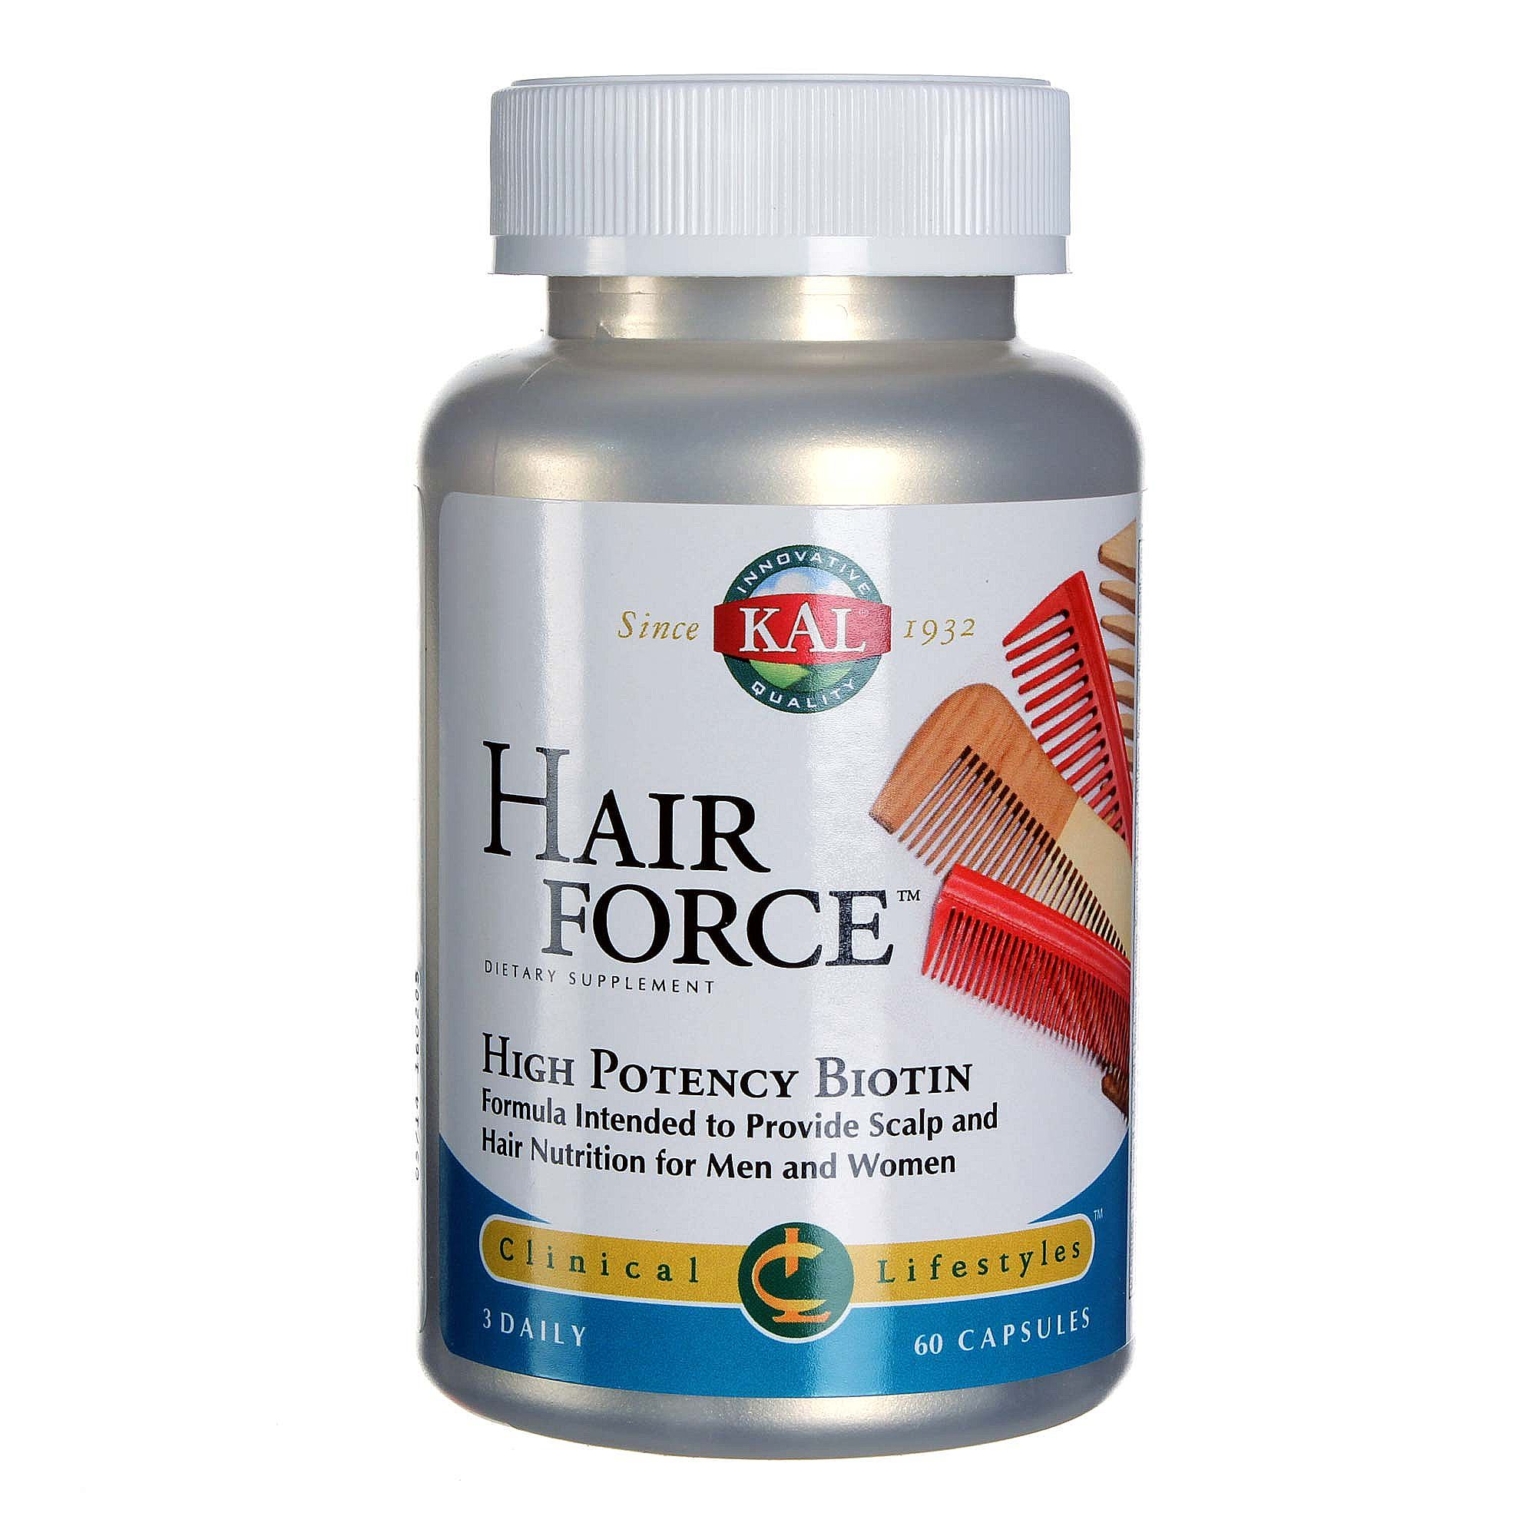 Hair Force by Home boxed Review - The New Hair Styling Trend From Home ...